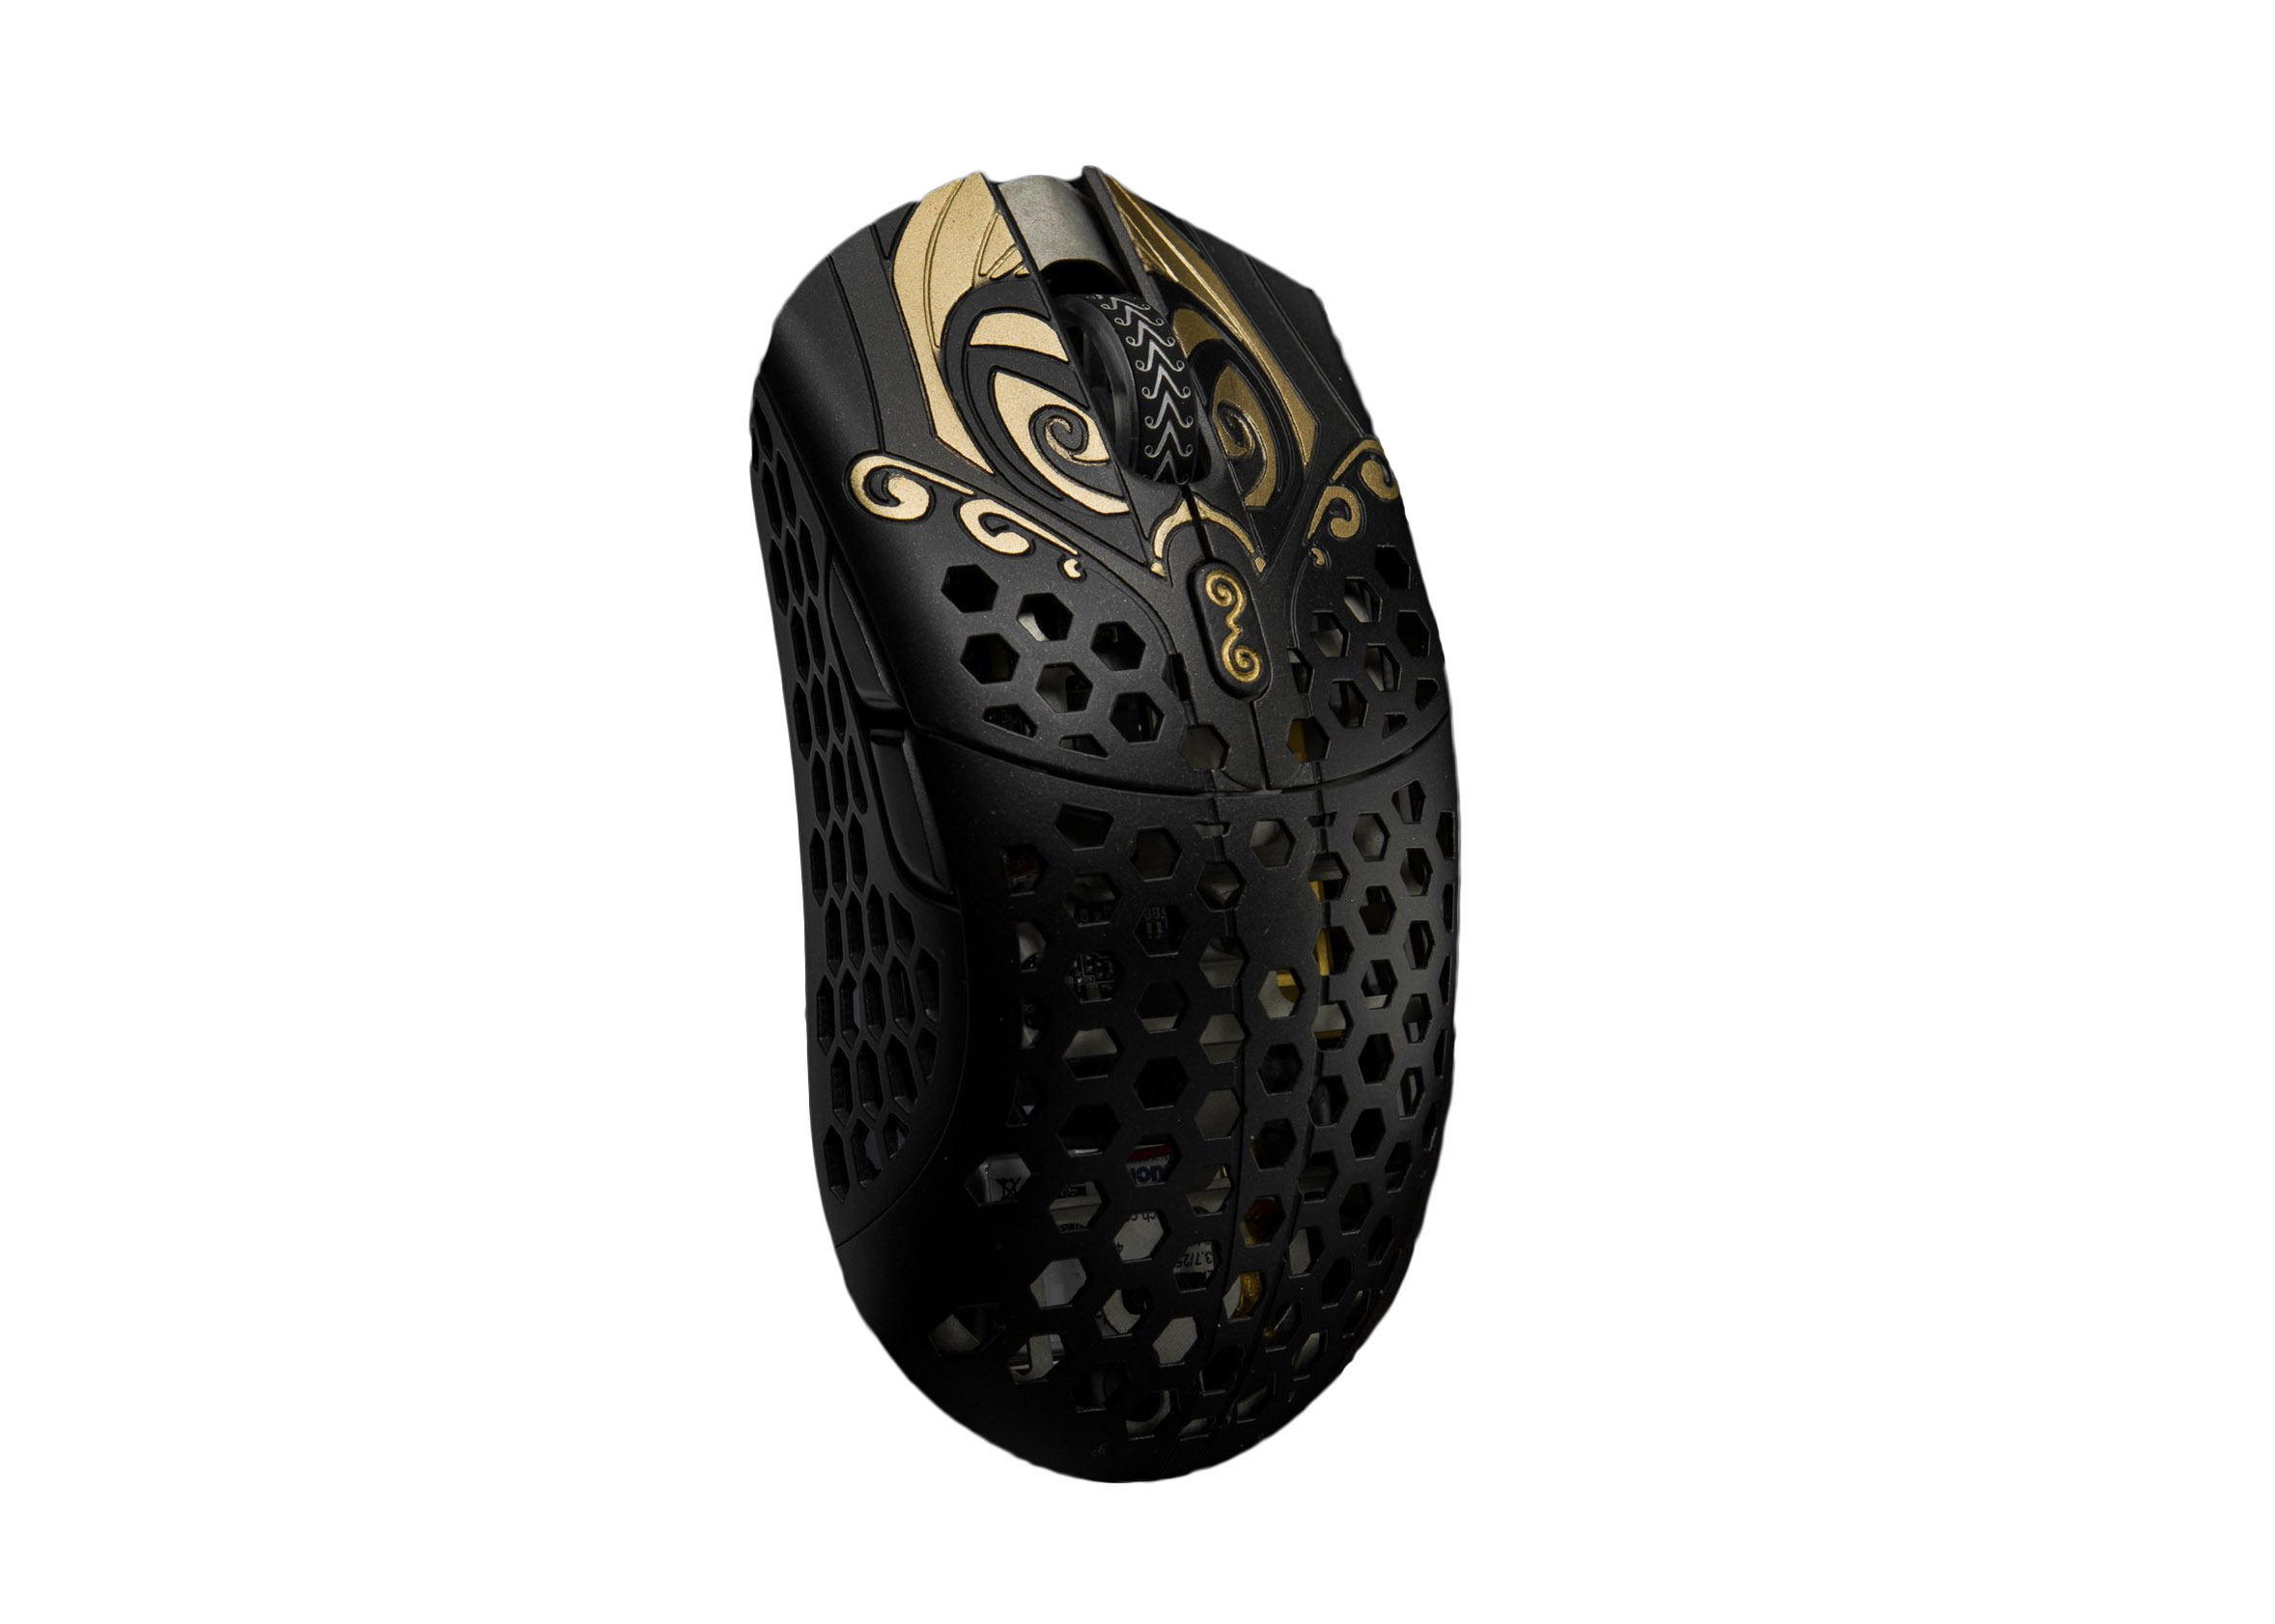 Finalmouse Starlight-12 Wireless Mouse Small Hades King of the Dead